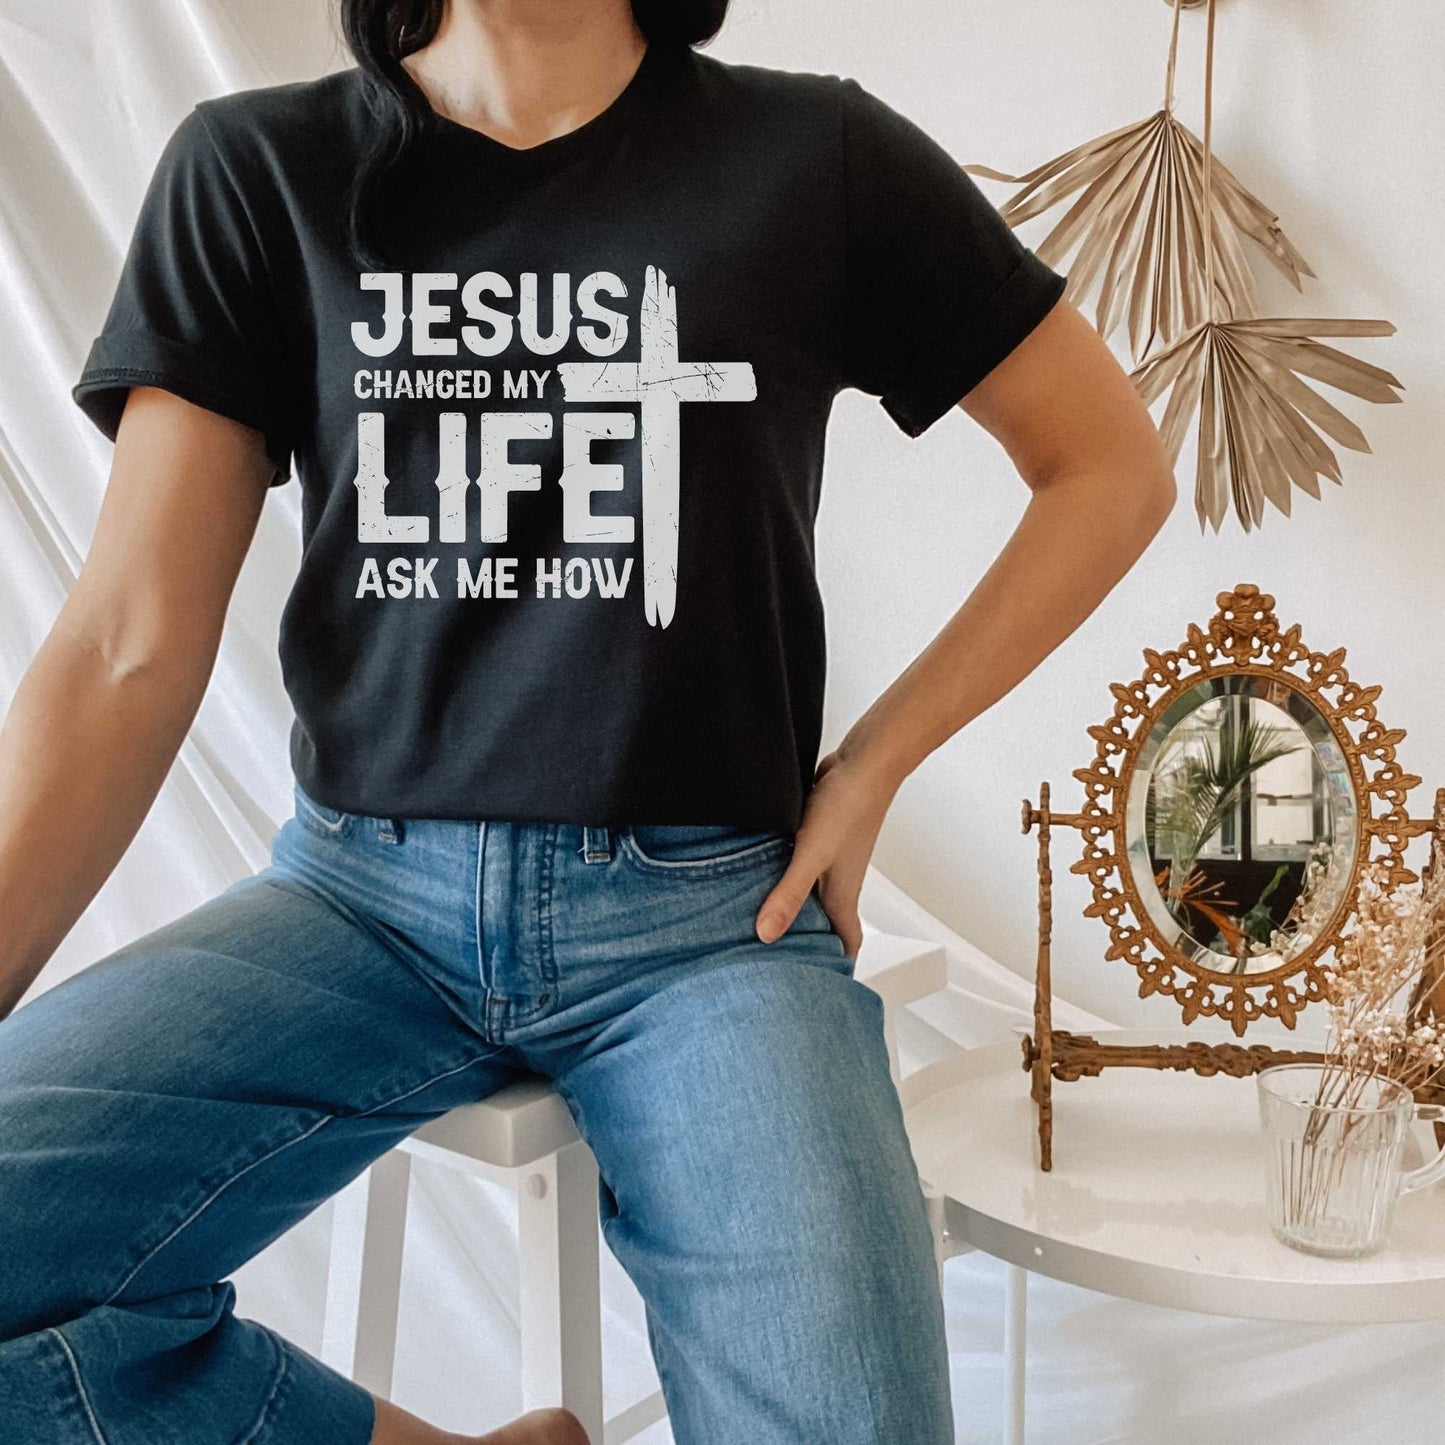 Jesus Saved My Life Ask Me How, Faith tshirts for Women and Men